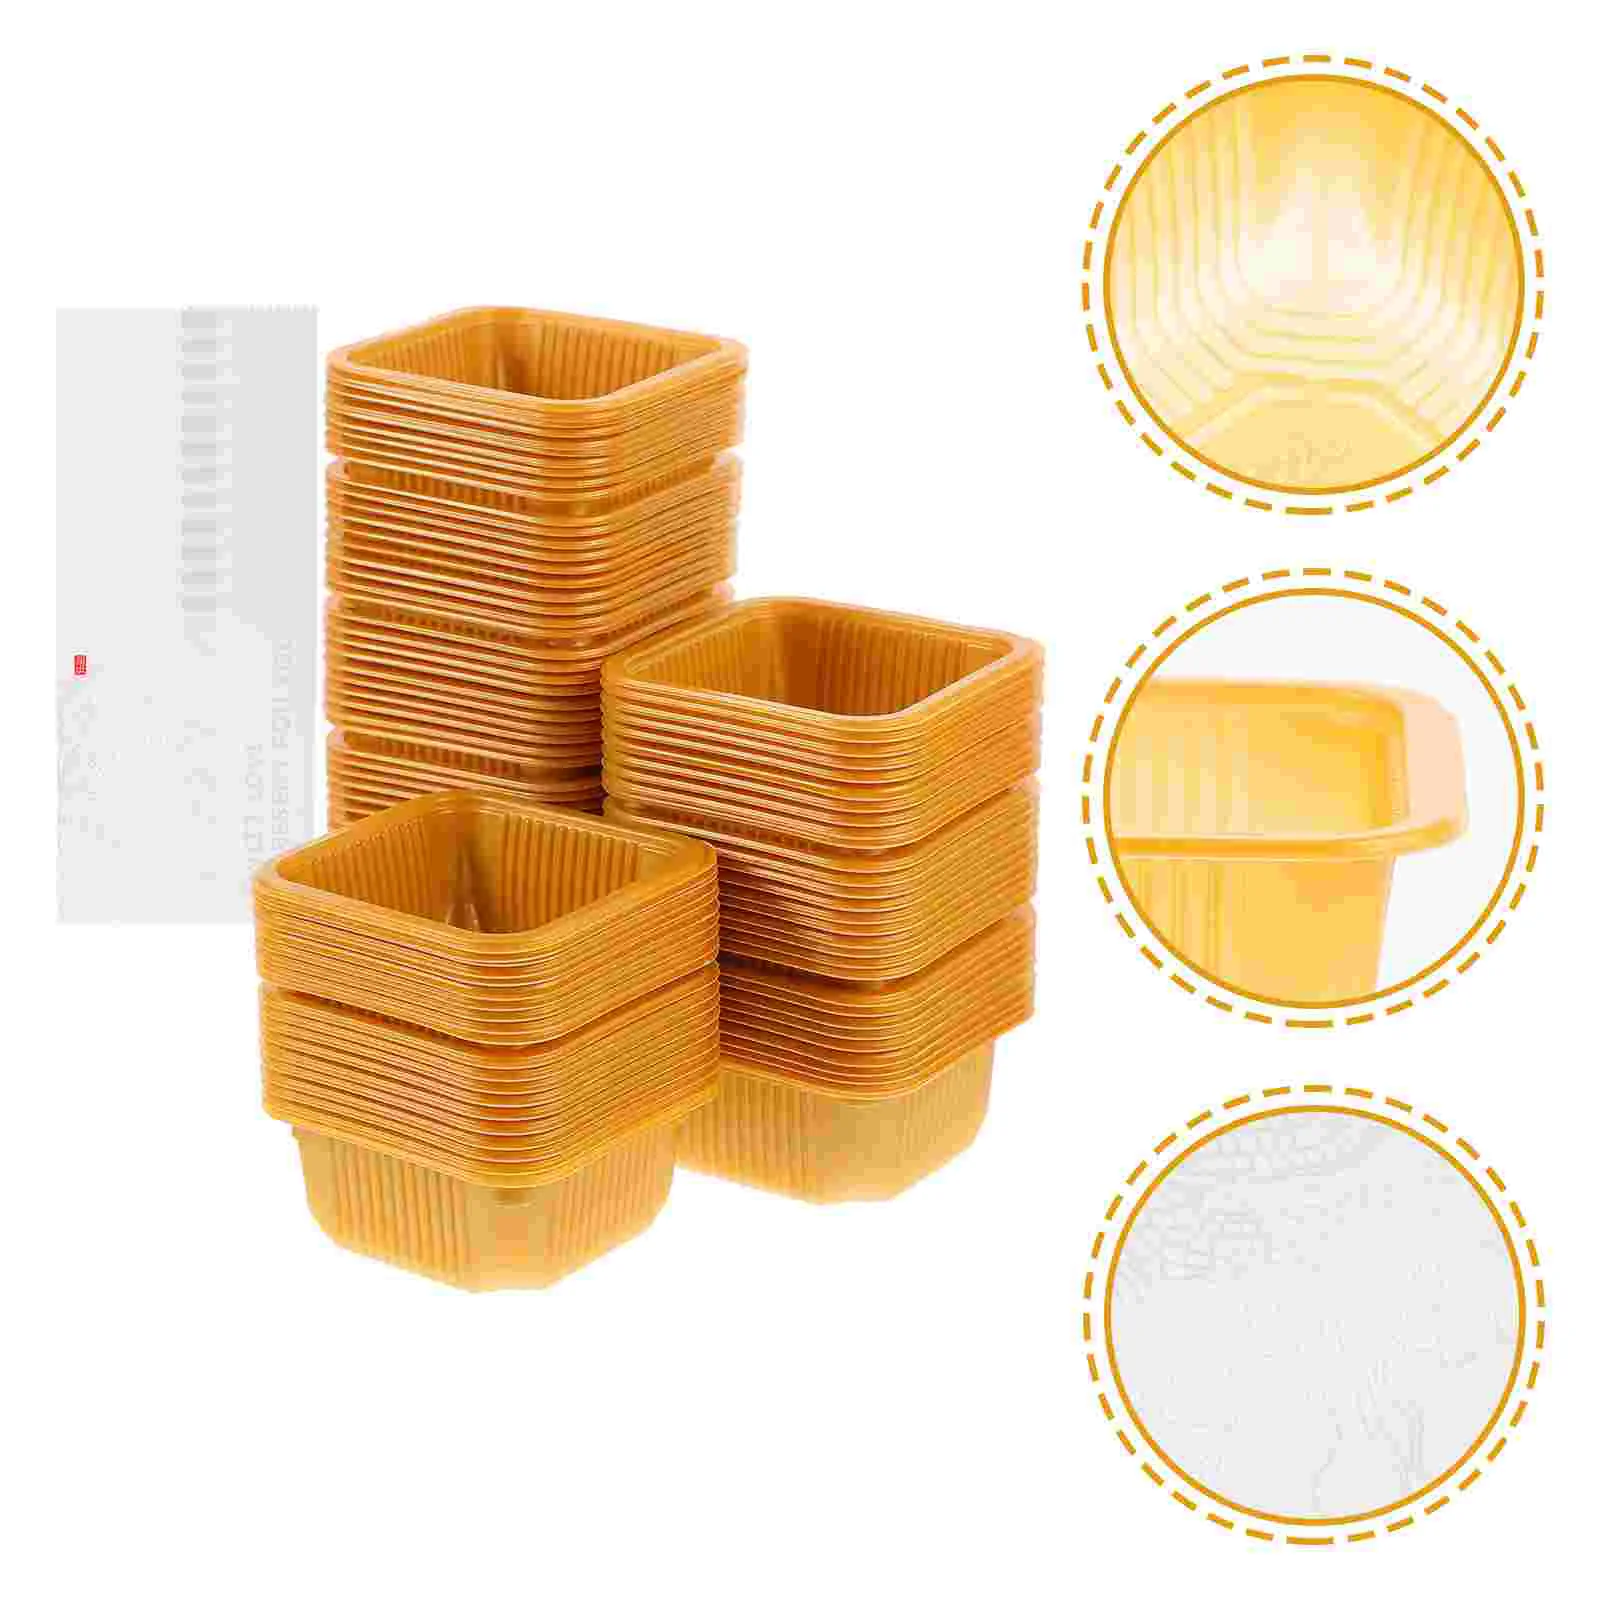 

Baking Bags Desserts Moon Cake Tray for Baked Food Decorative Container Cpp with Packing Carrying